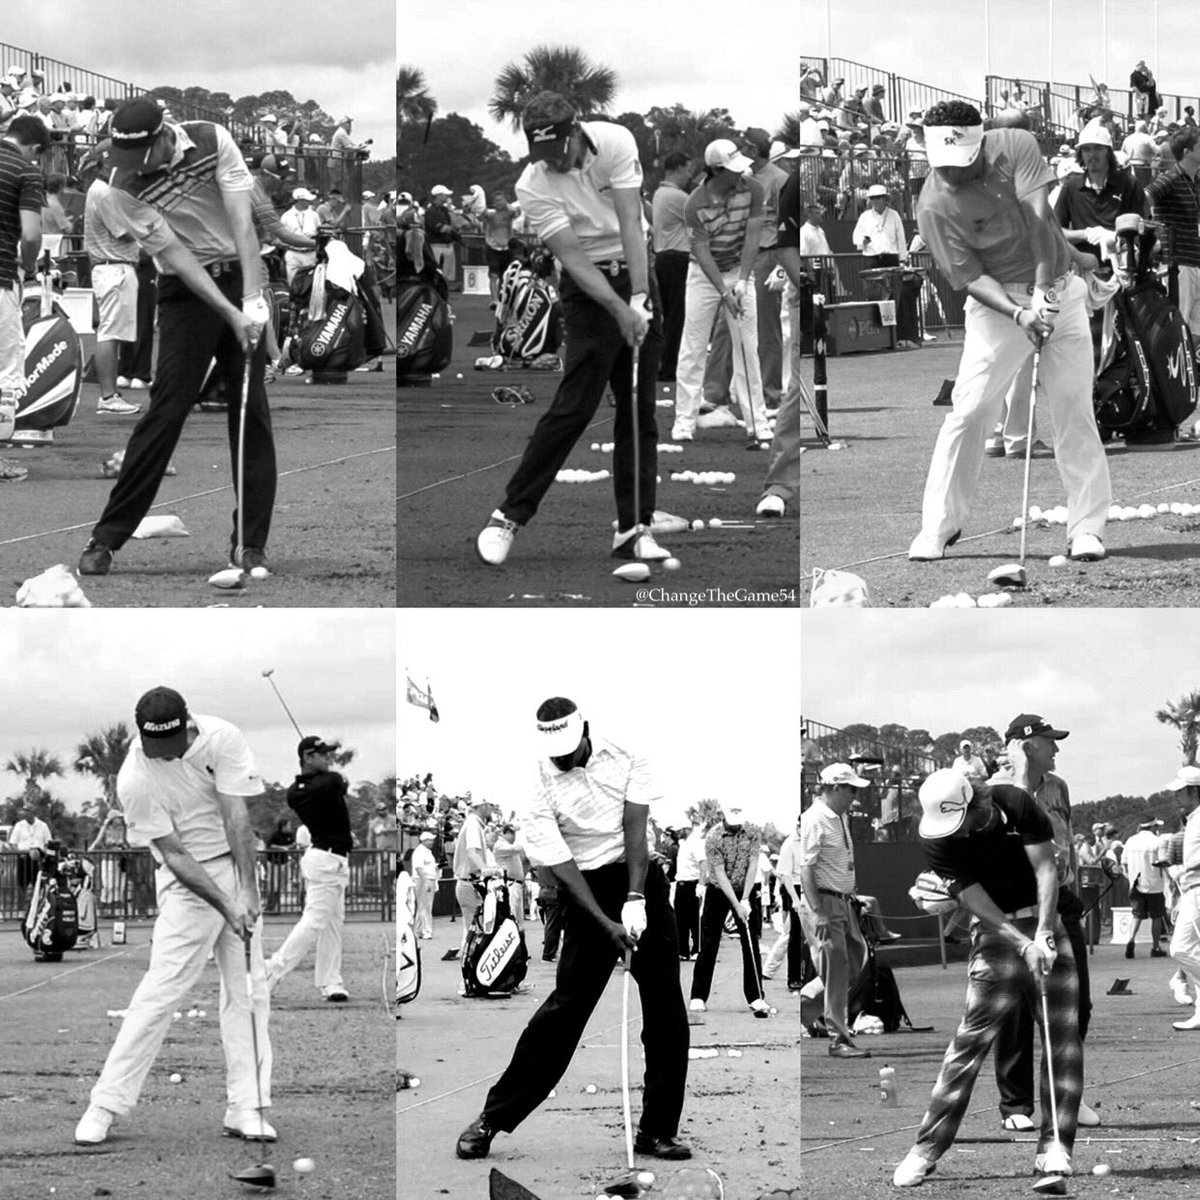 The Golf Swing: Efficient & Optimal sequencing of a series of compensating mistakes.

#ImpactMastery #FunctionOverForm #TechniqueInContext #PerfectionAvoidance #BallFlight #Excellence #RetroSwings